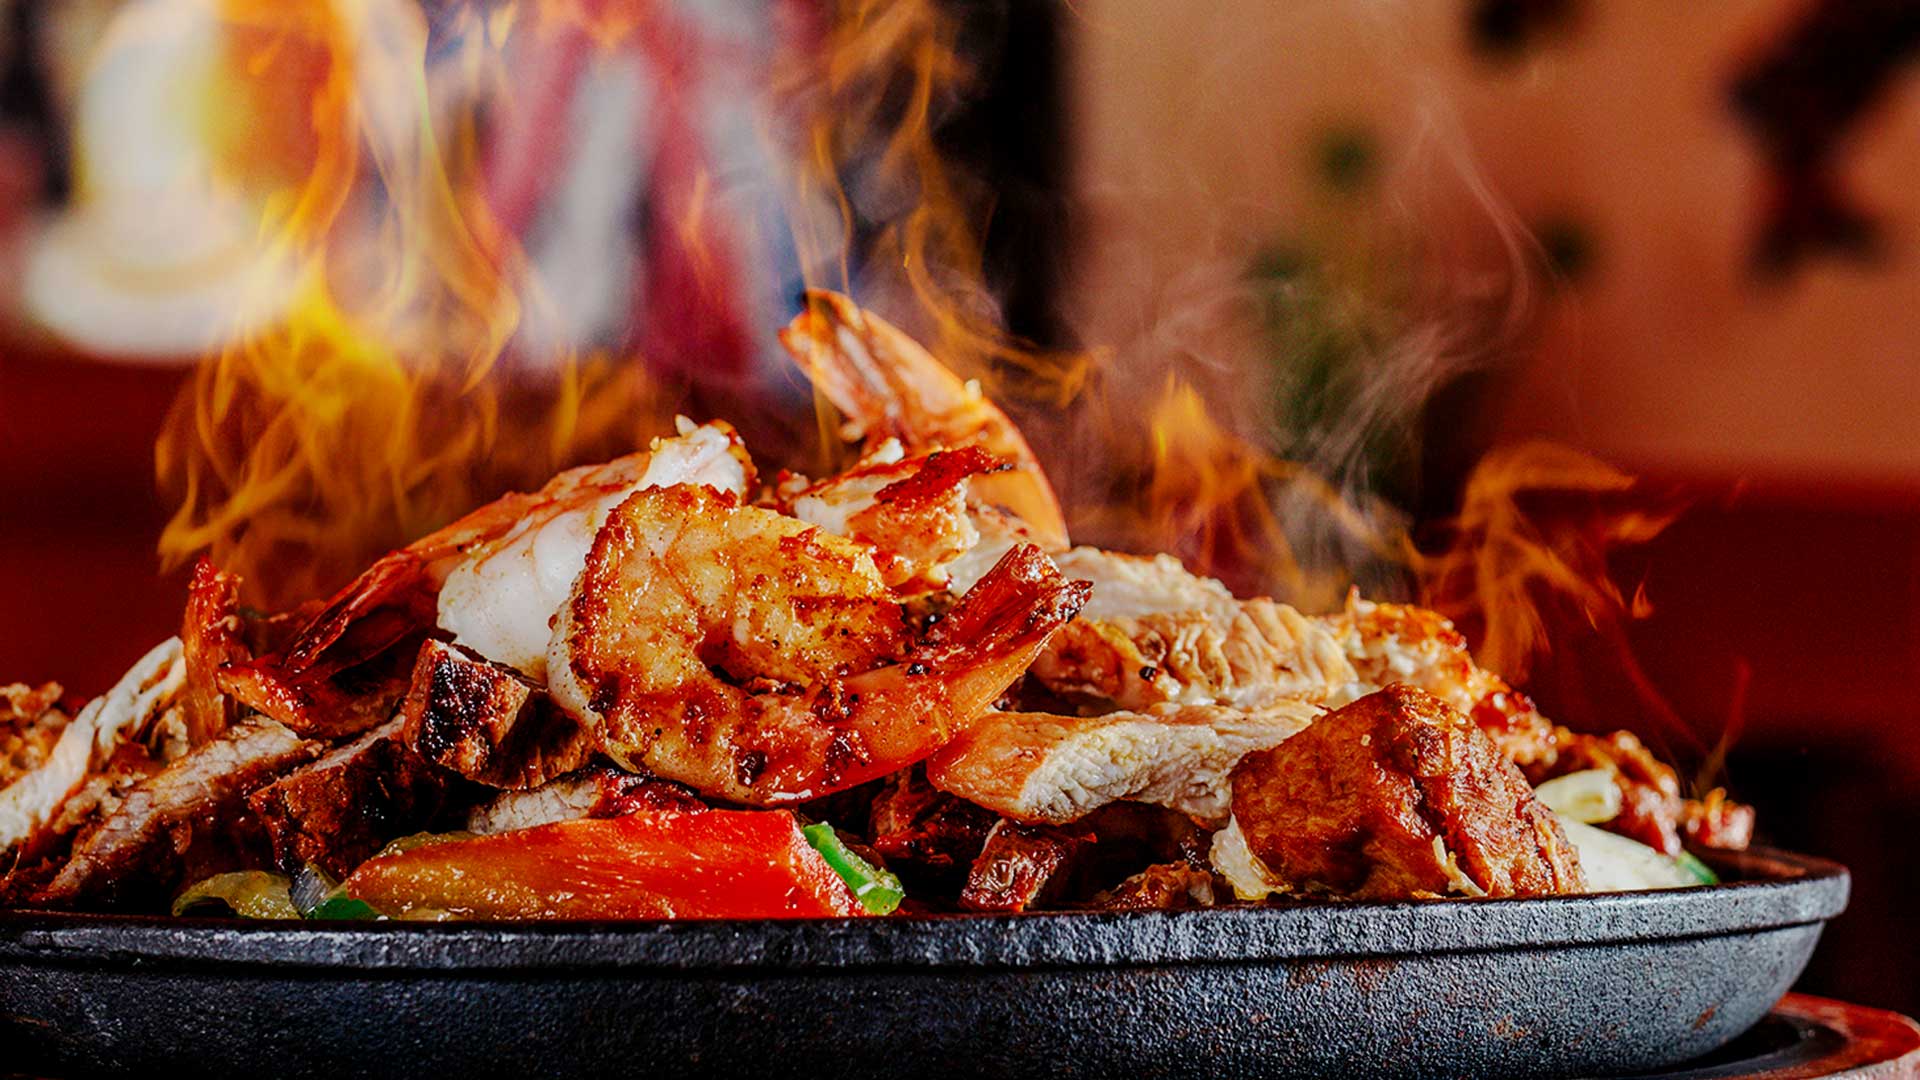 A flaming fajita topped with shrimp, one of the delicious Mexican food specialties we offer